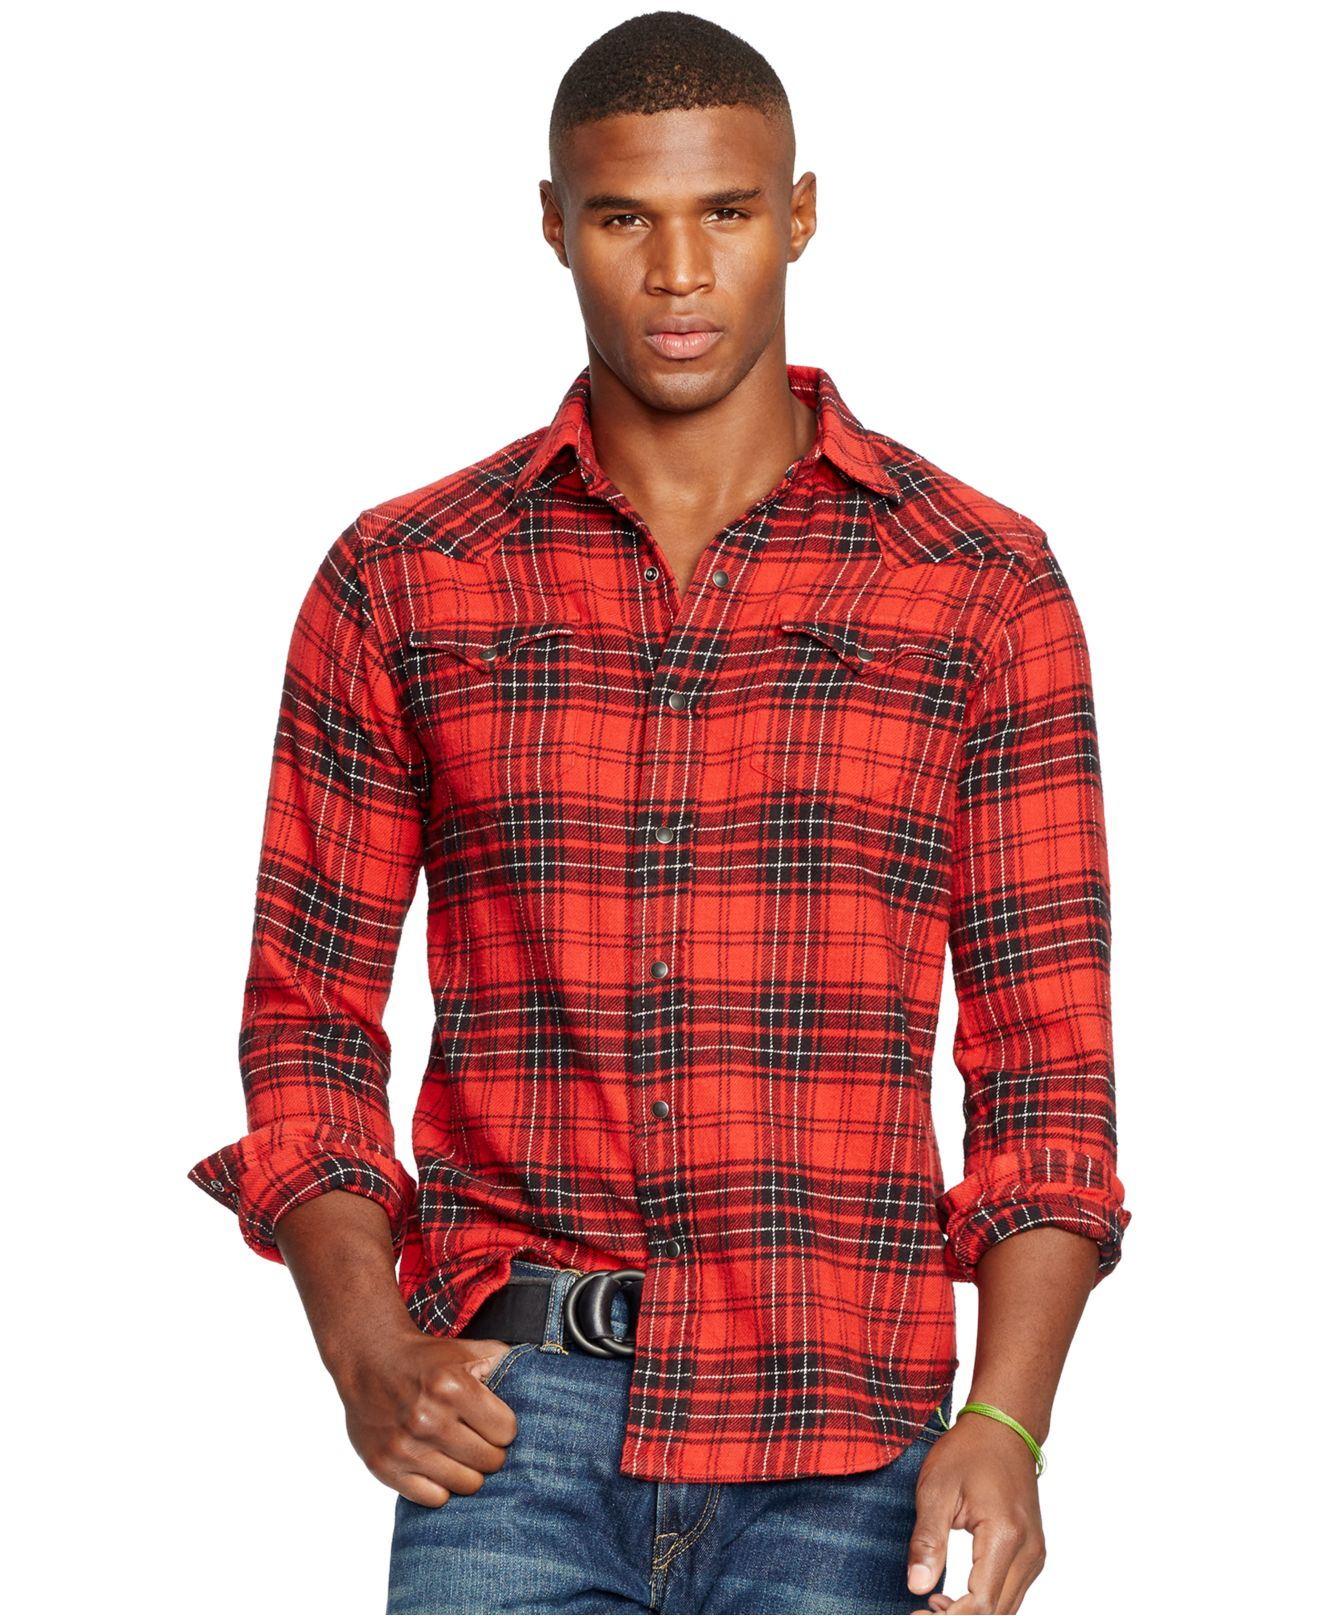 Lyst - Polo Ralph Lauren Plaid Twill Western Shirt in Red for Men